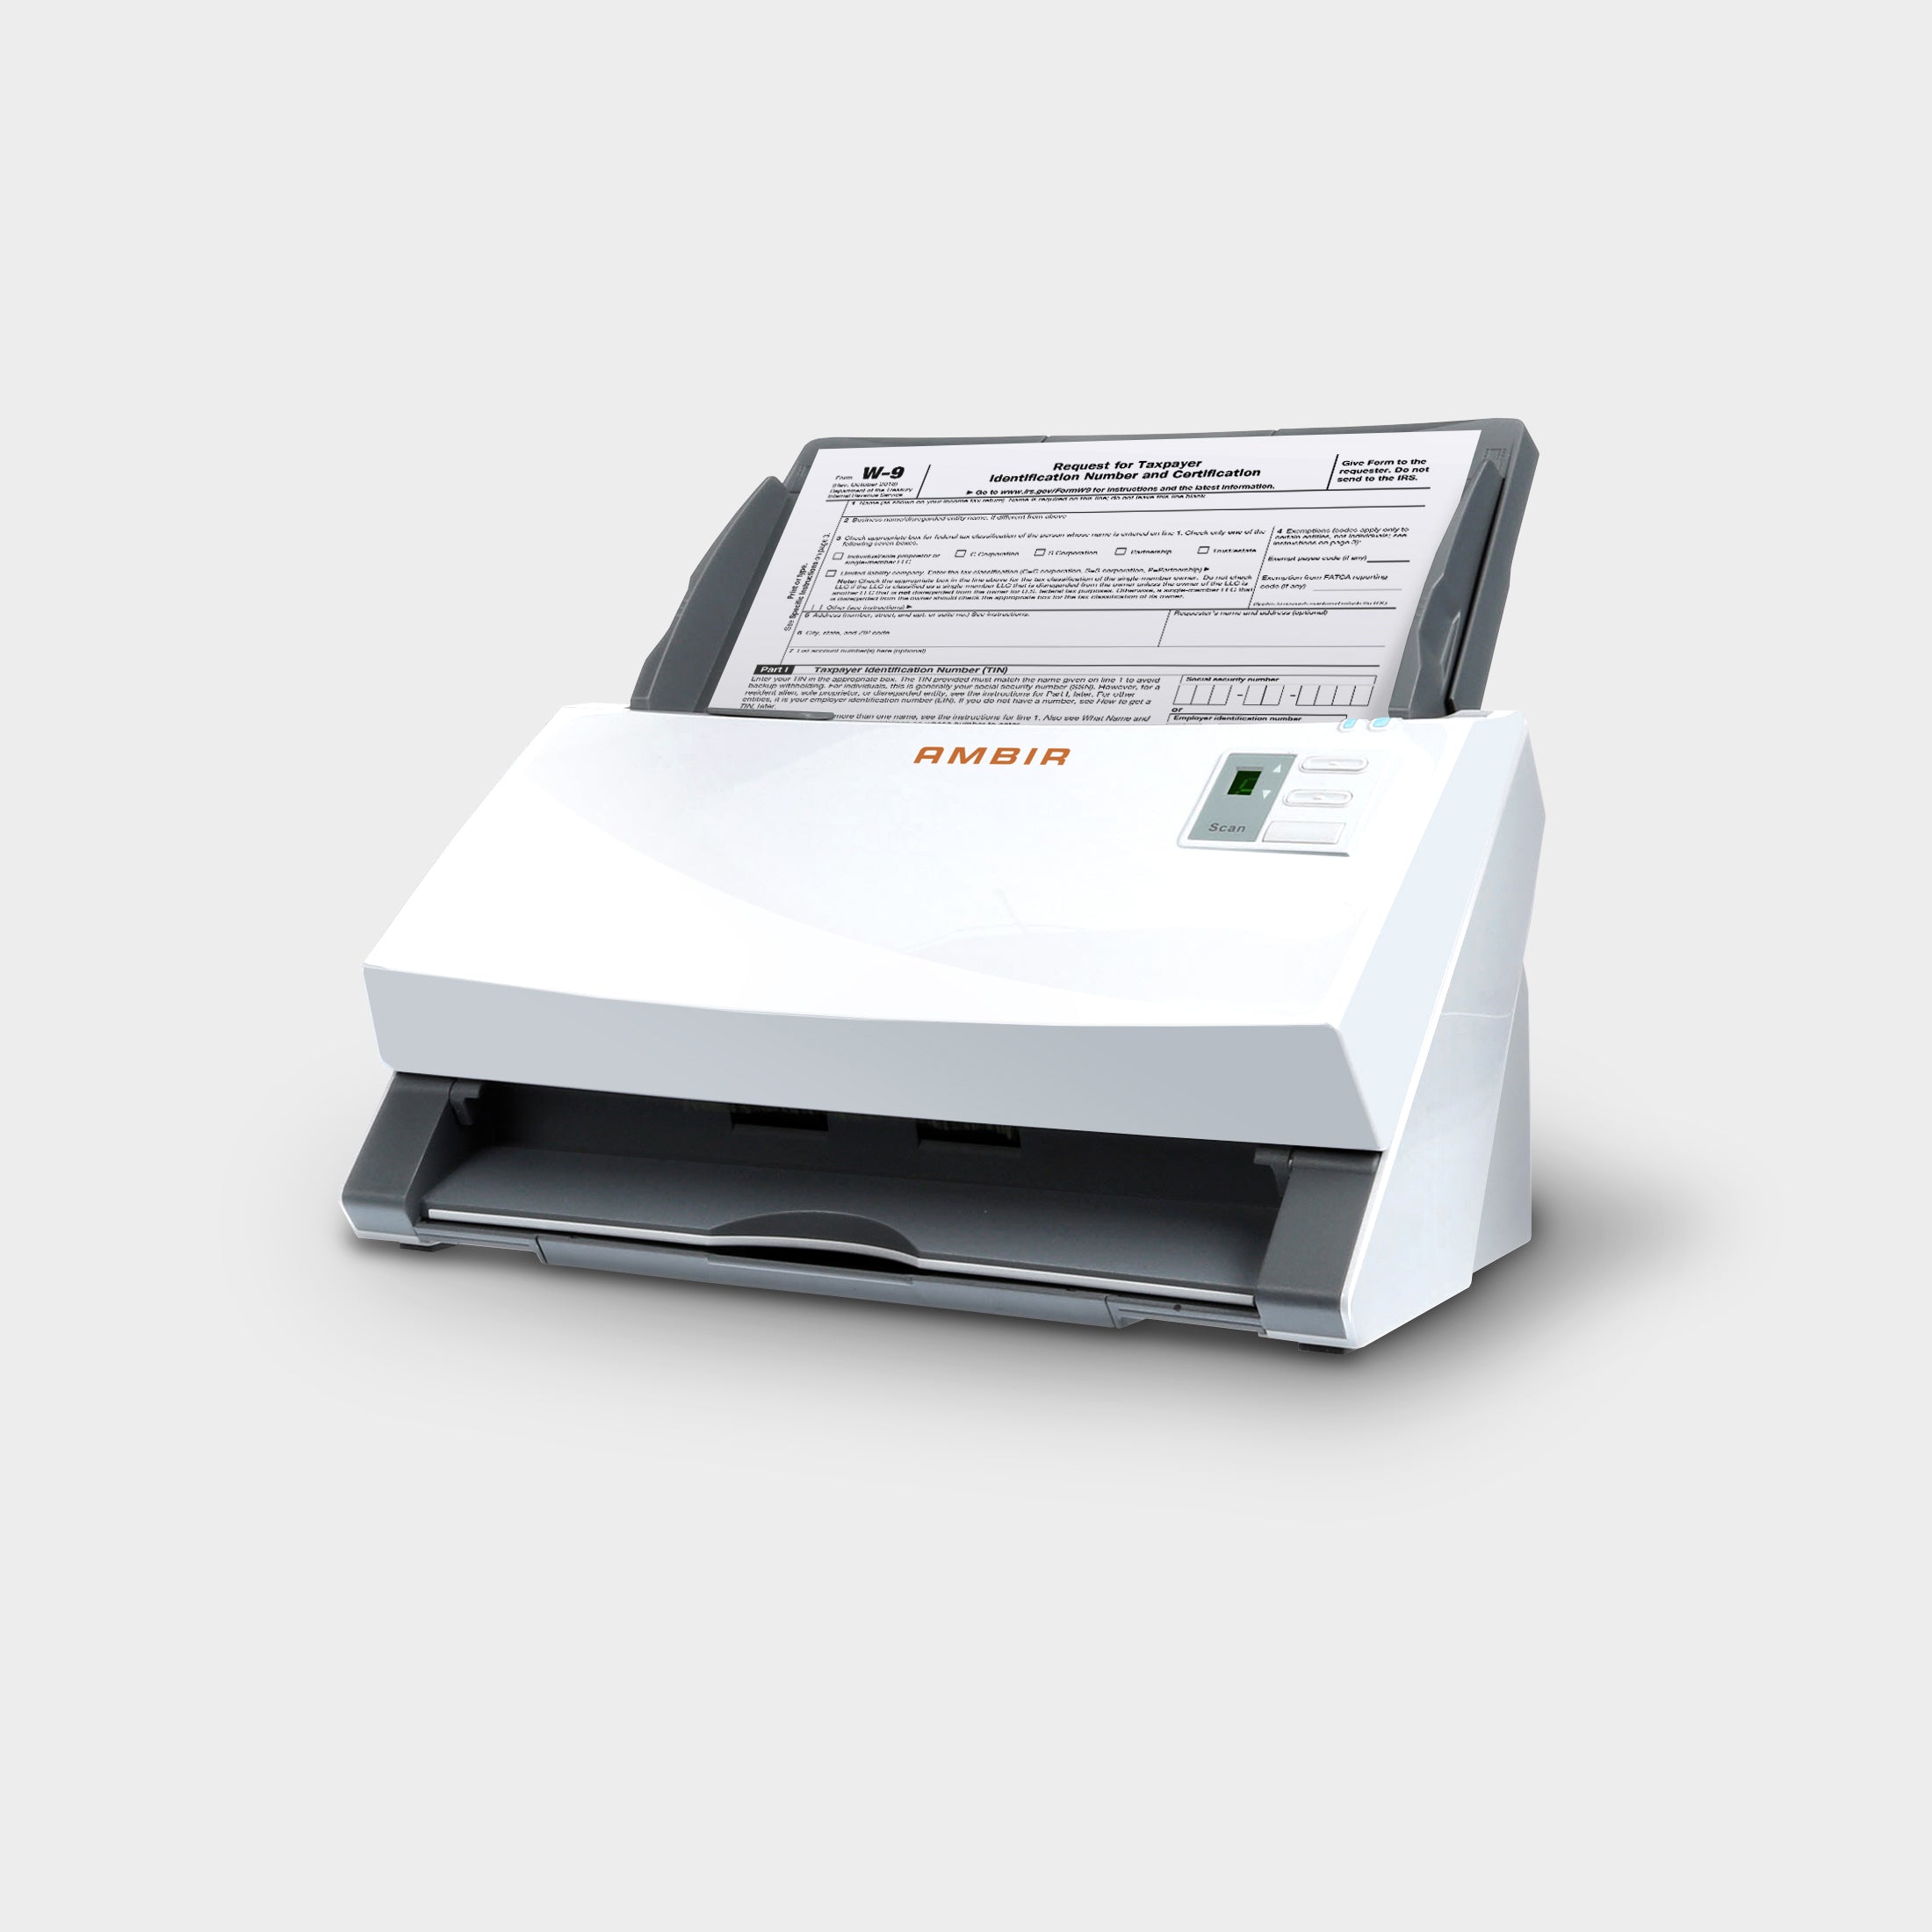 ImageScan Pro 340 High Speed Document Scanner with UltraSonic Misfeed Detection (DS340-SE)